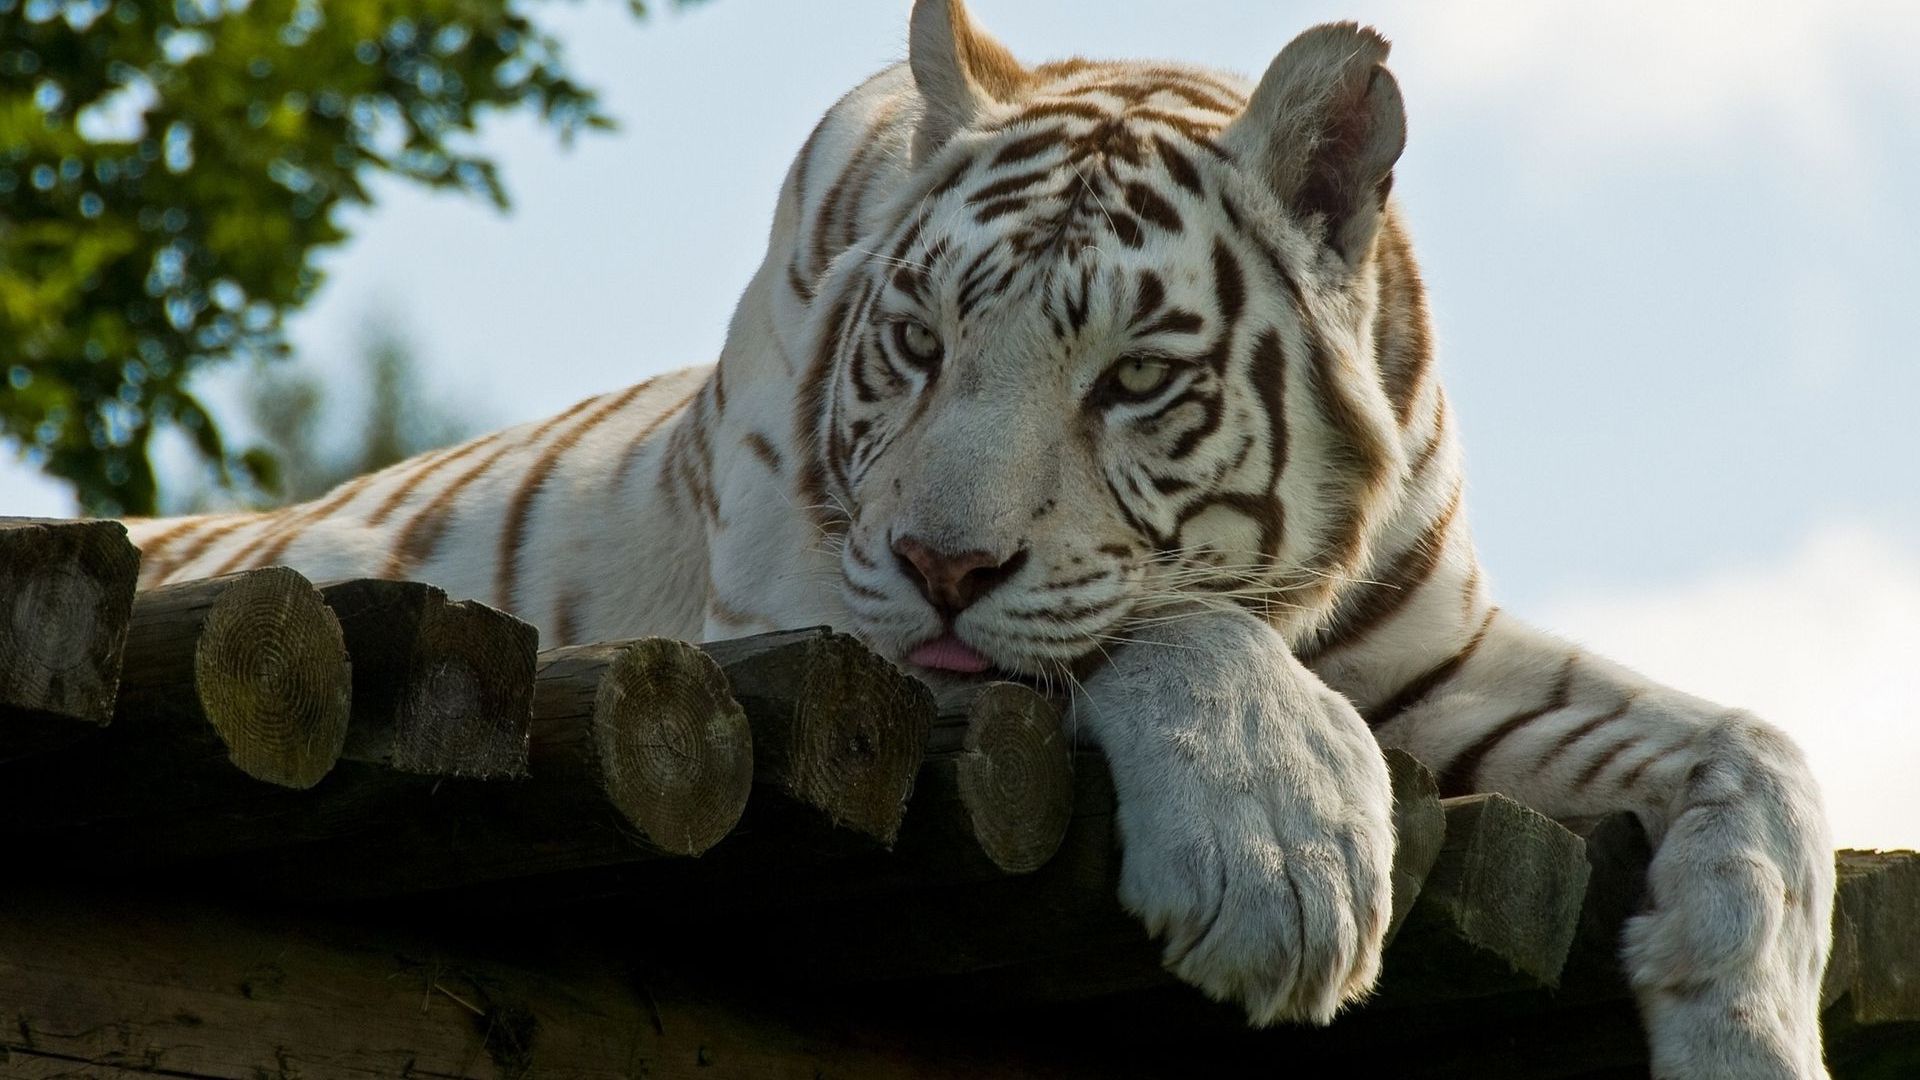 White Tiger Wallpapers Images Photos Pictures Backgrounds 1920x1080